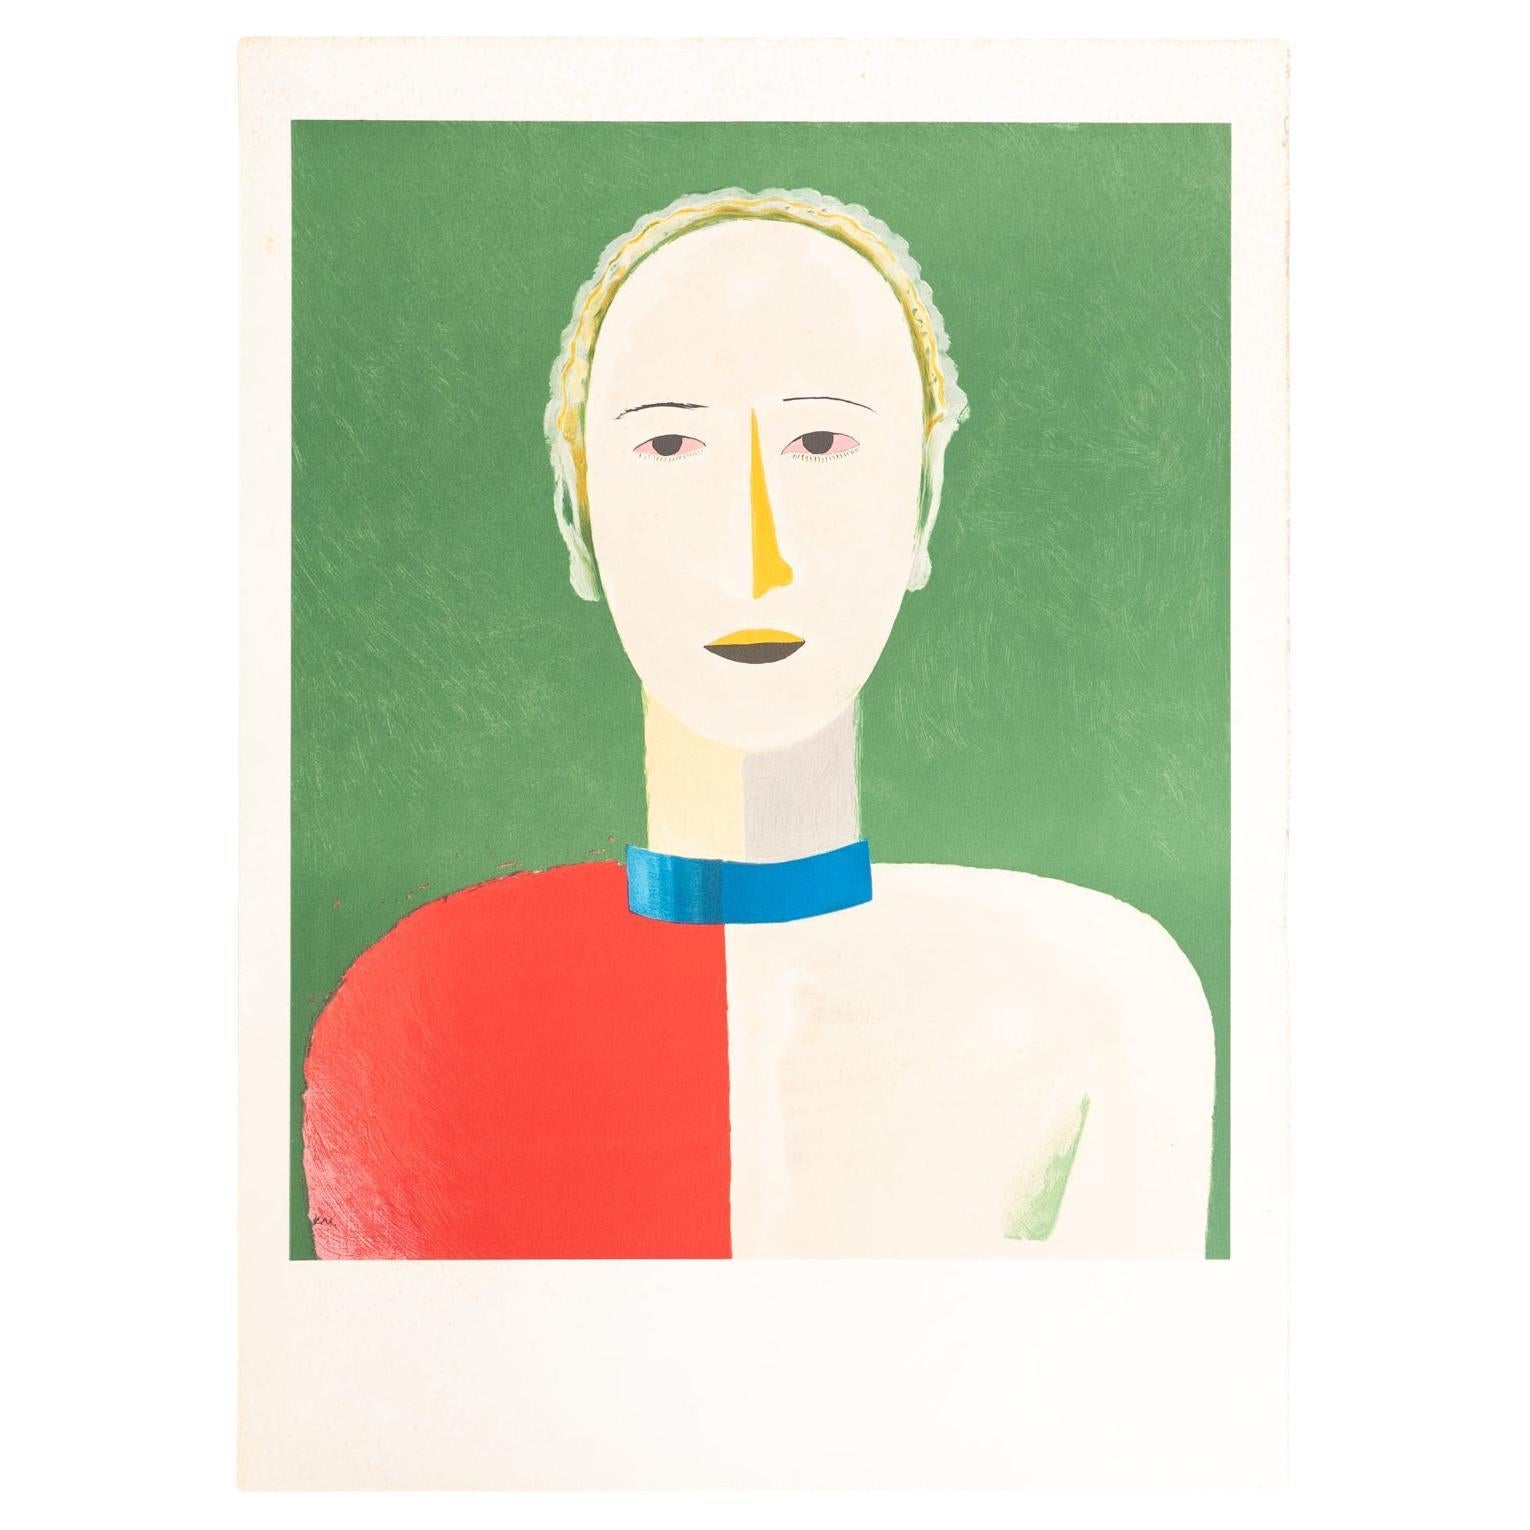 Kazimir Malevich "Portrait of a Female" Lithography For Sale